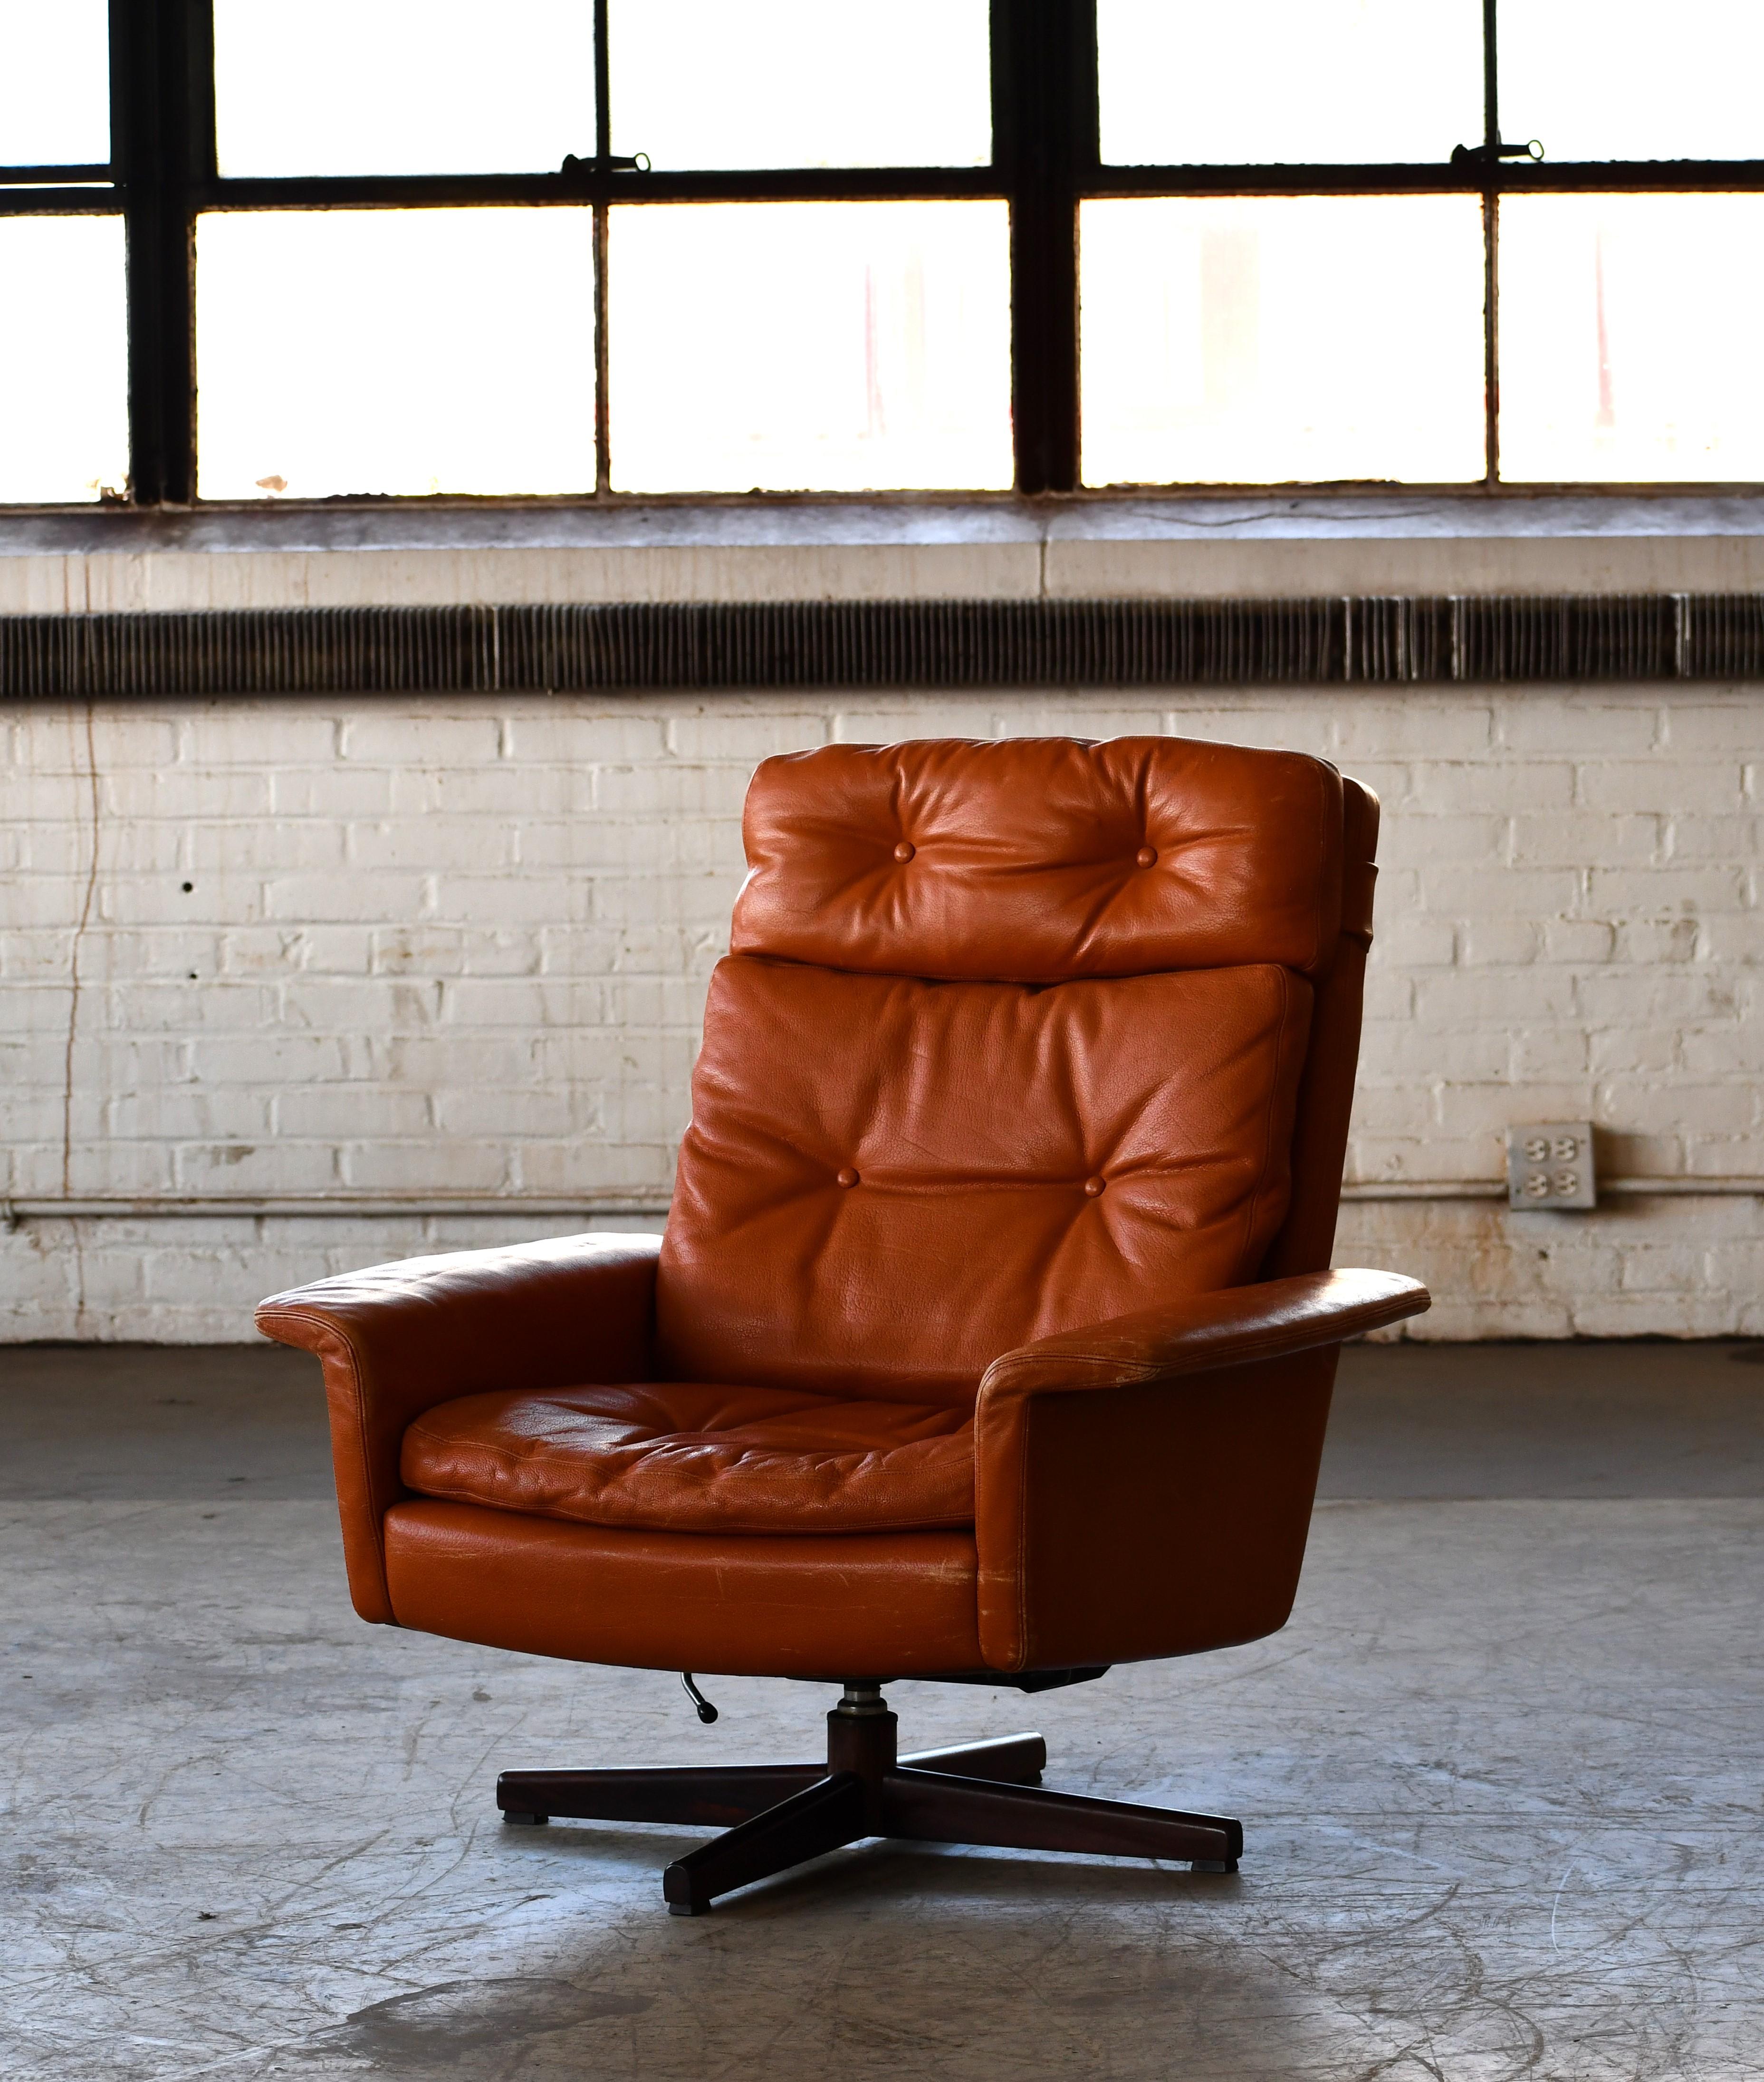 Late 20th Century Danish High Back Swivel Lounge Chair with Ottoman in Cognac Leather, 1970's For Sale